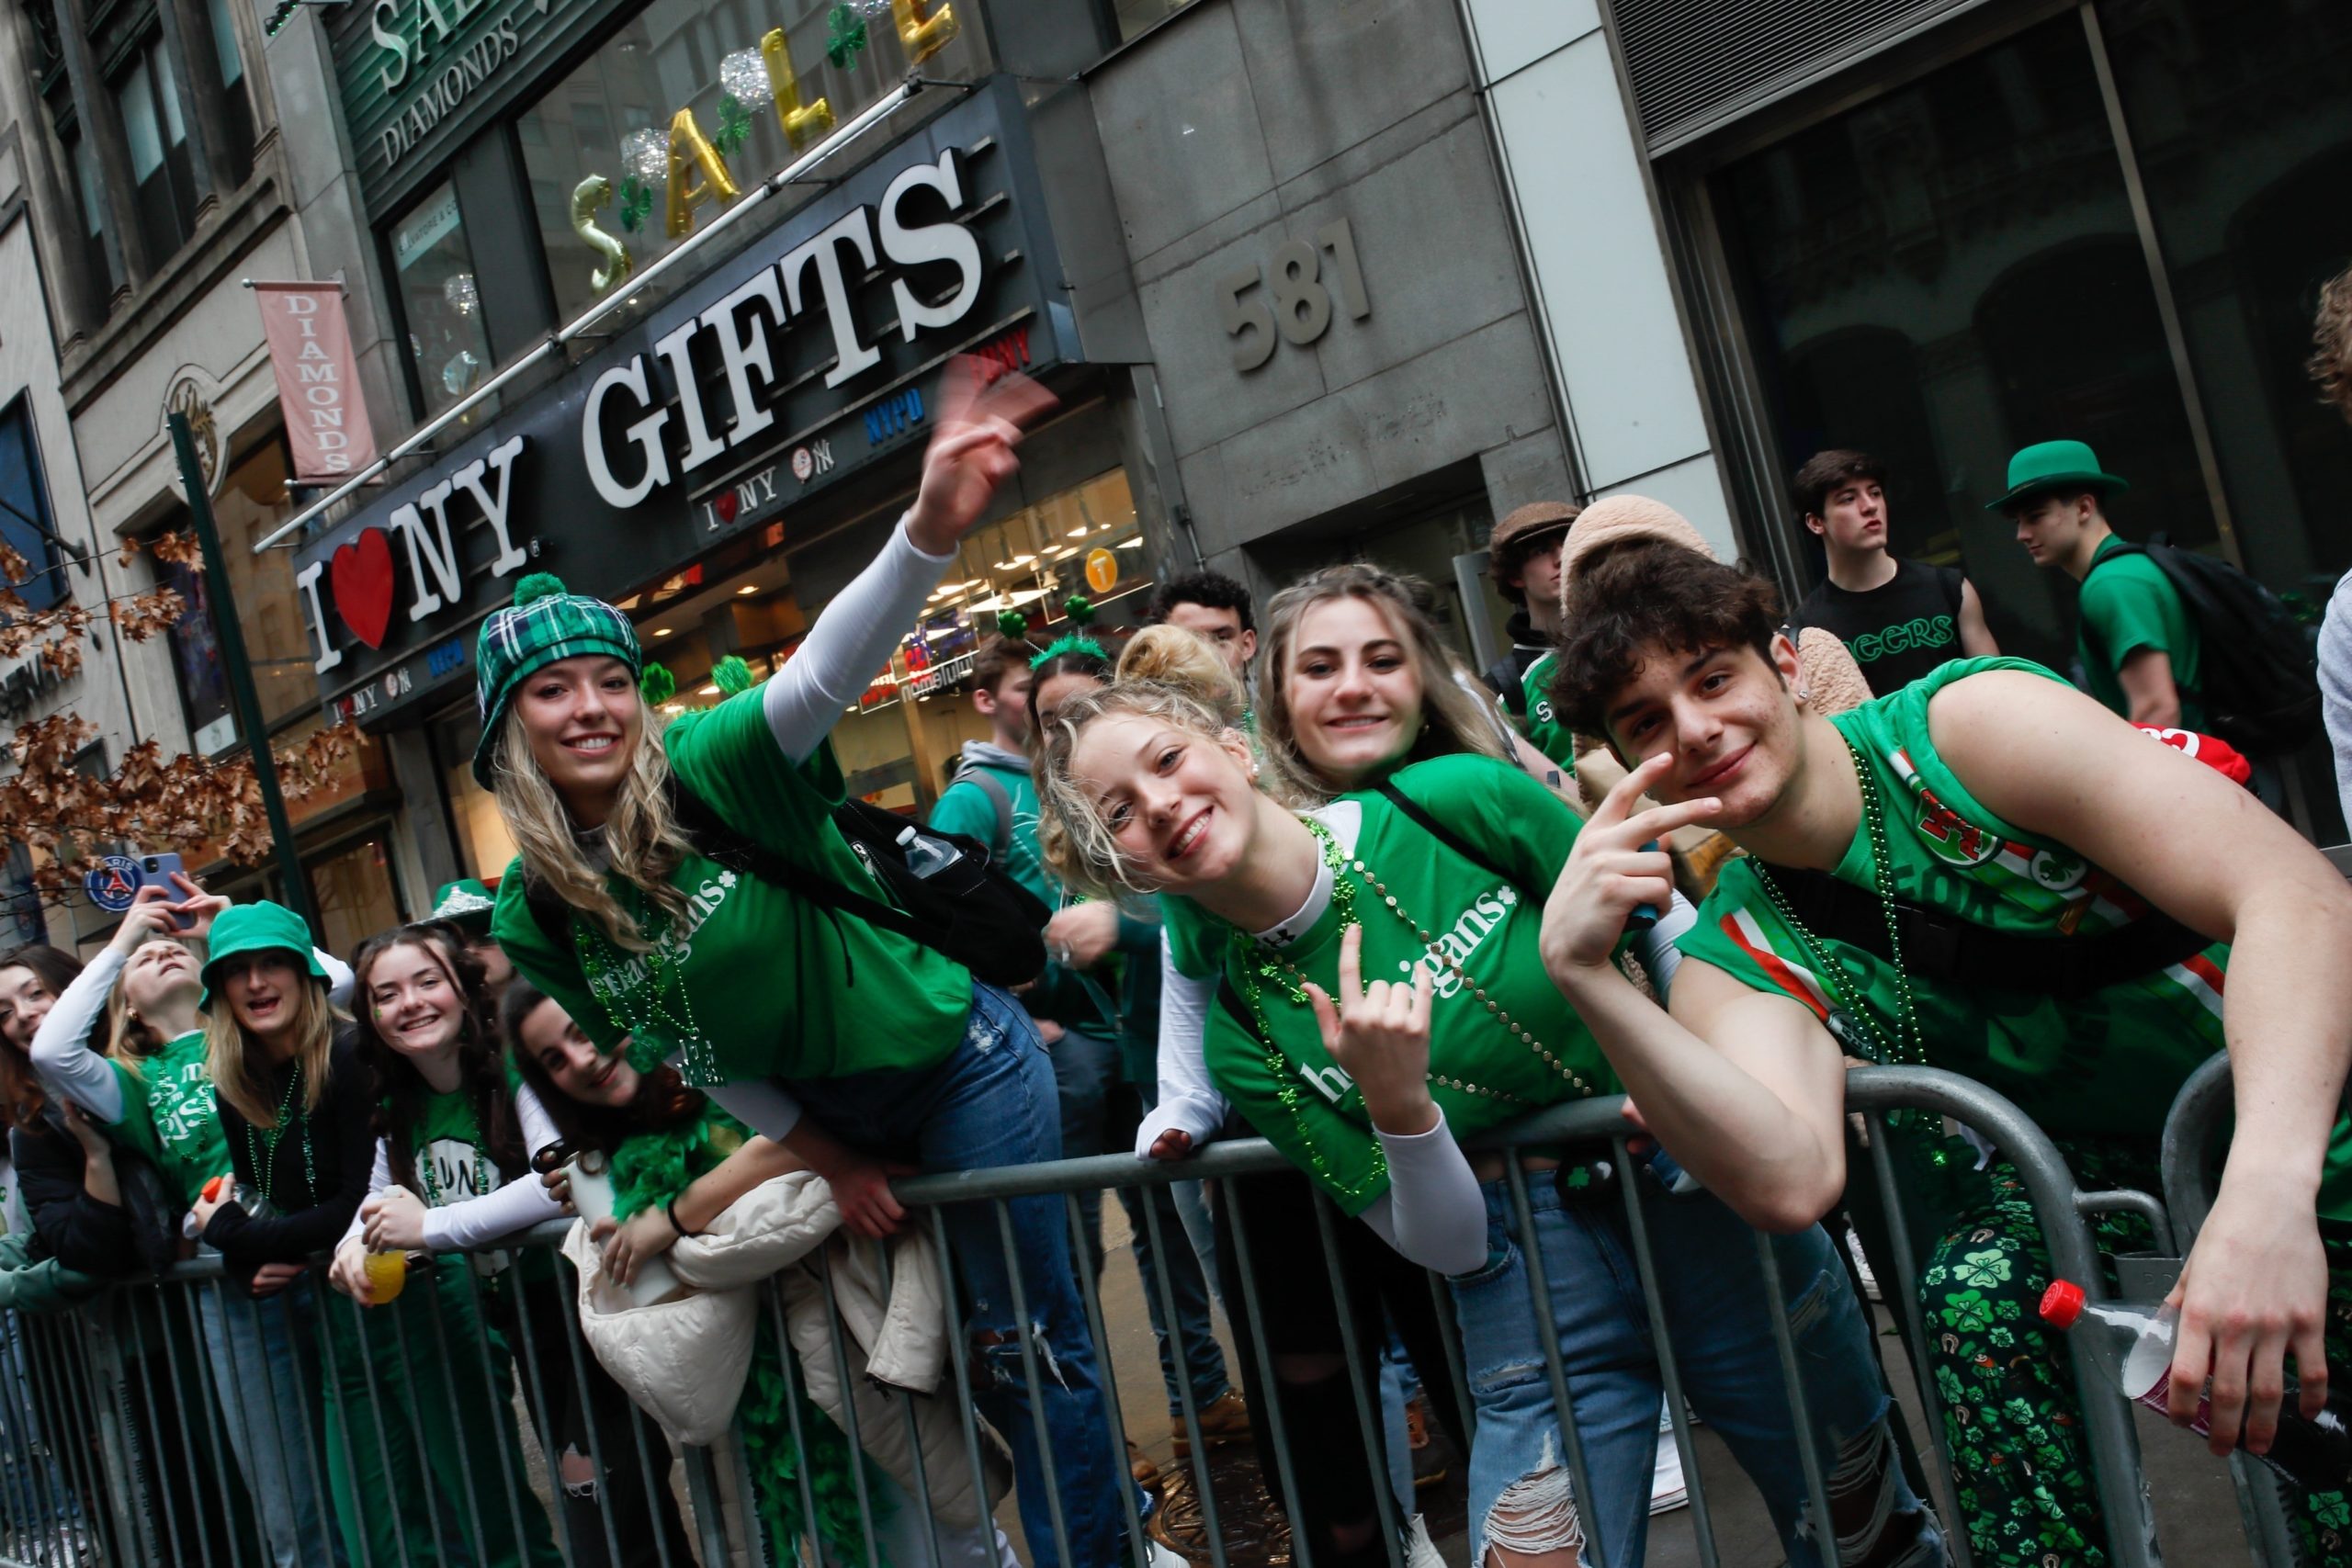 Sea of green in NYC as St. Patrick's Day Parade returns